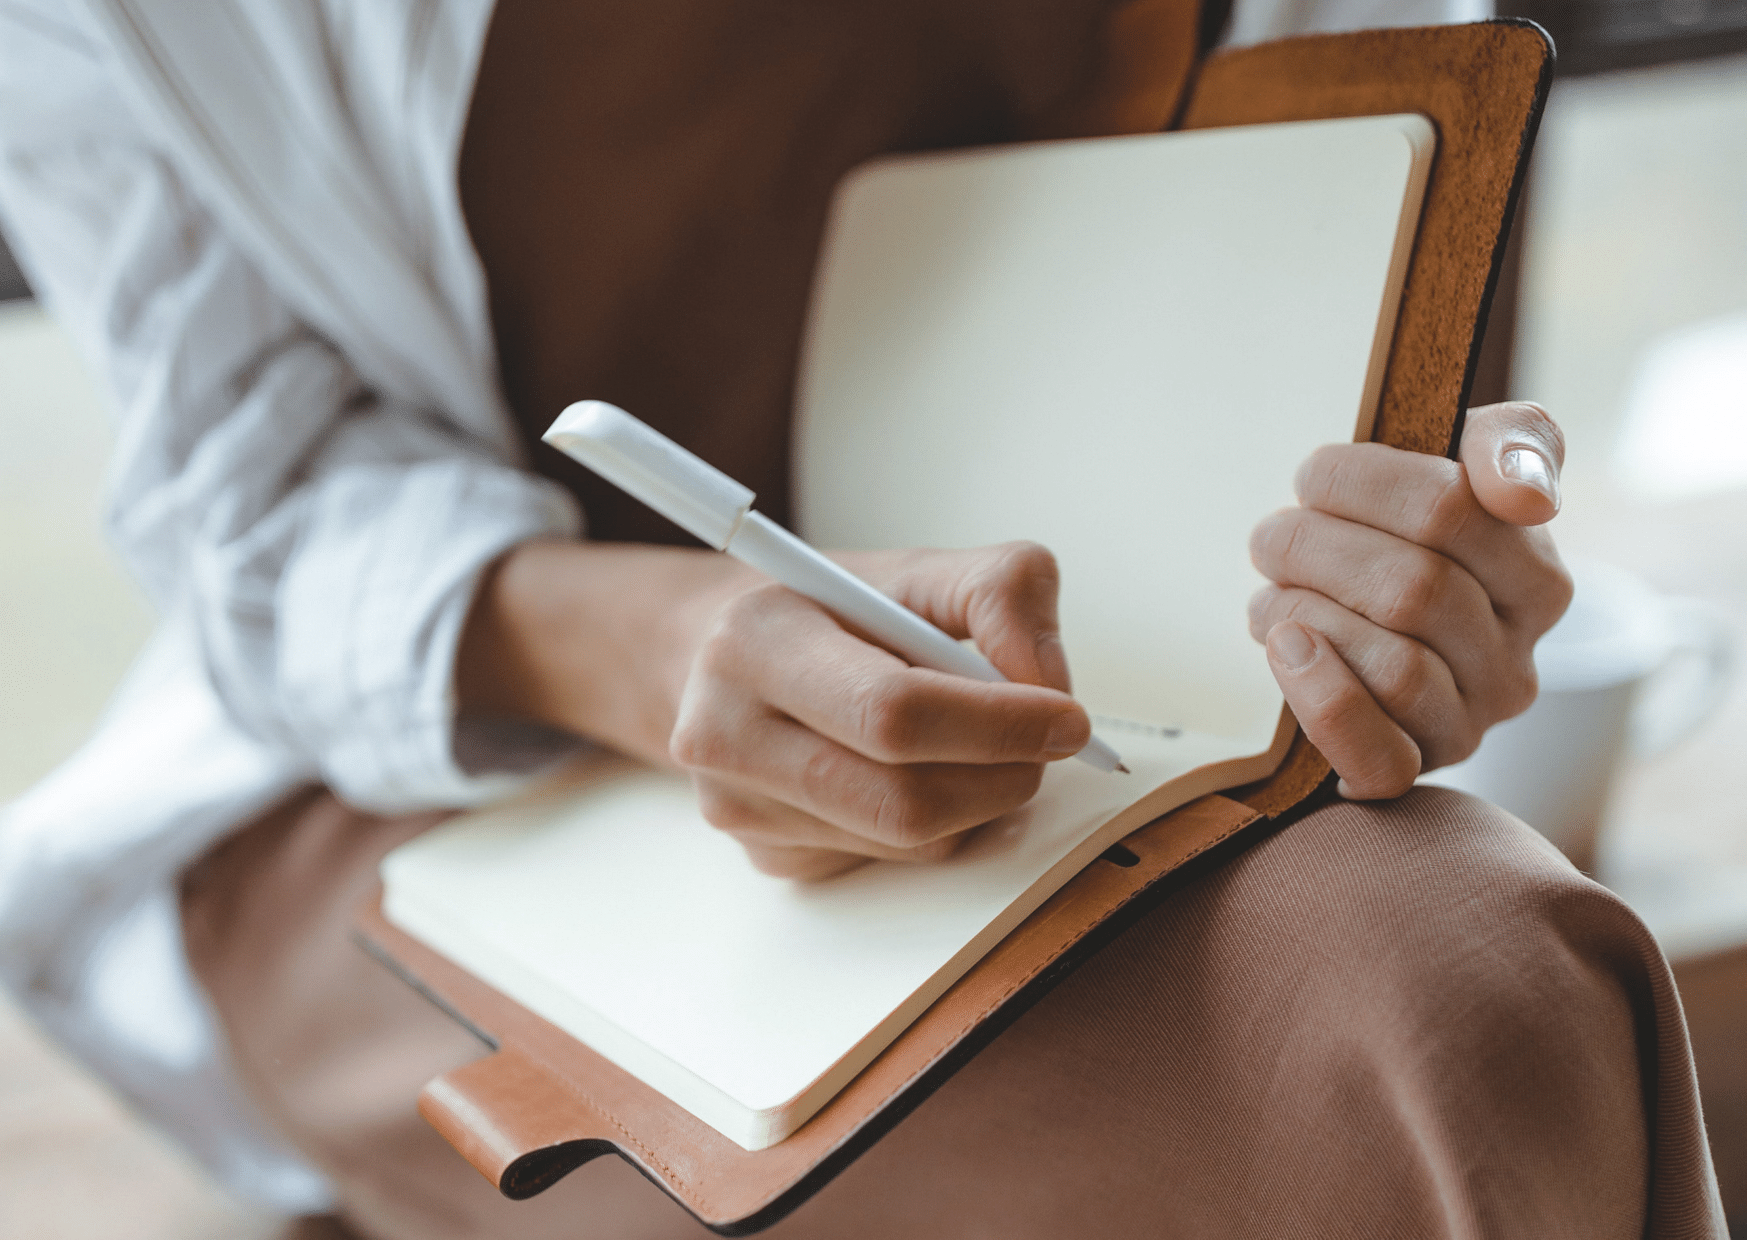 woman journaling in a notebook on her lap- self care journal prompts